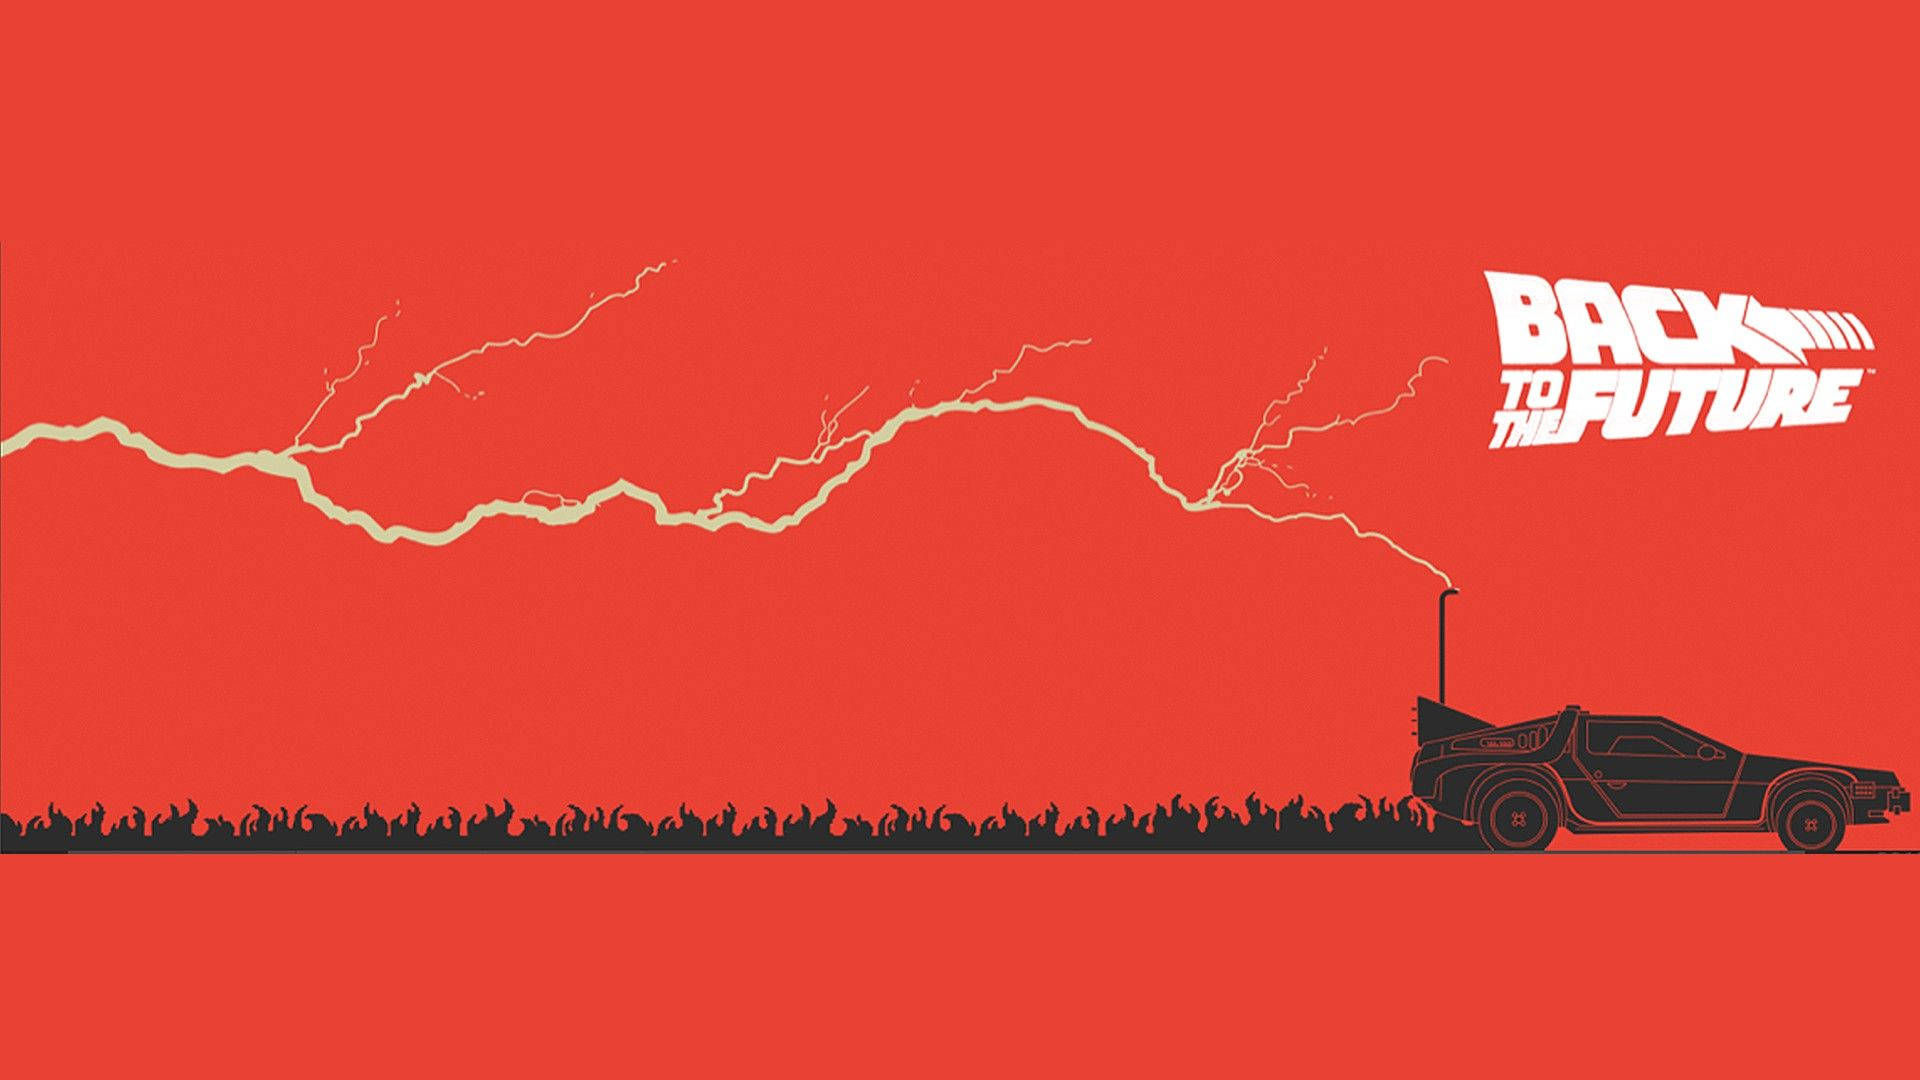 Back To The Future Art On Red Background